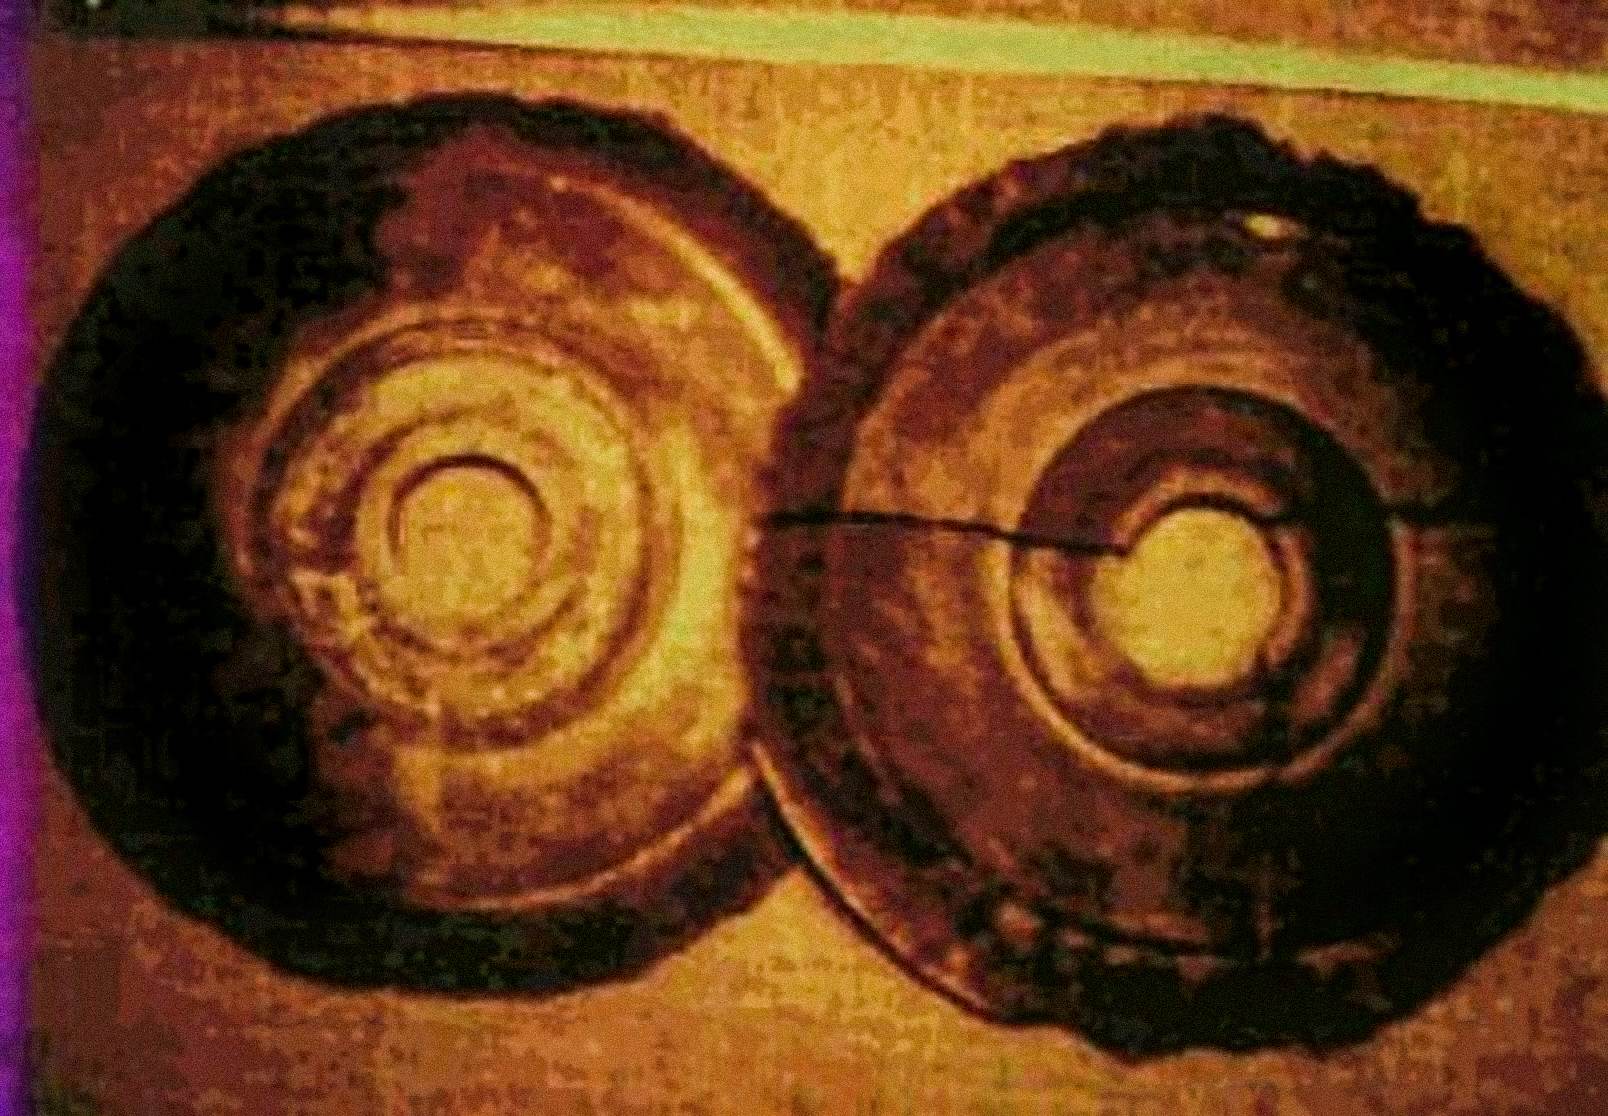 In 1974, Ernst Wegerer, an Austrian engineer, photographed two disks that met the descriptions of the Dropa Stones. He was on a guided tour of Banpo-Museum in Xian, when he saw the stone discs on display. He claims he saw a hole in the center of each disc and hieroglyphs in partly crumbled spiral-like grooves.